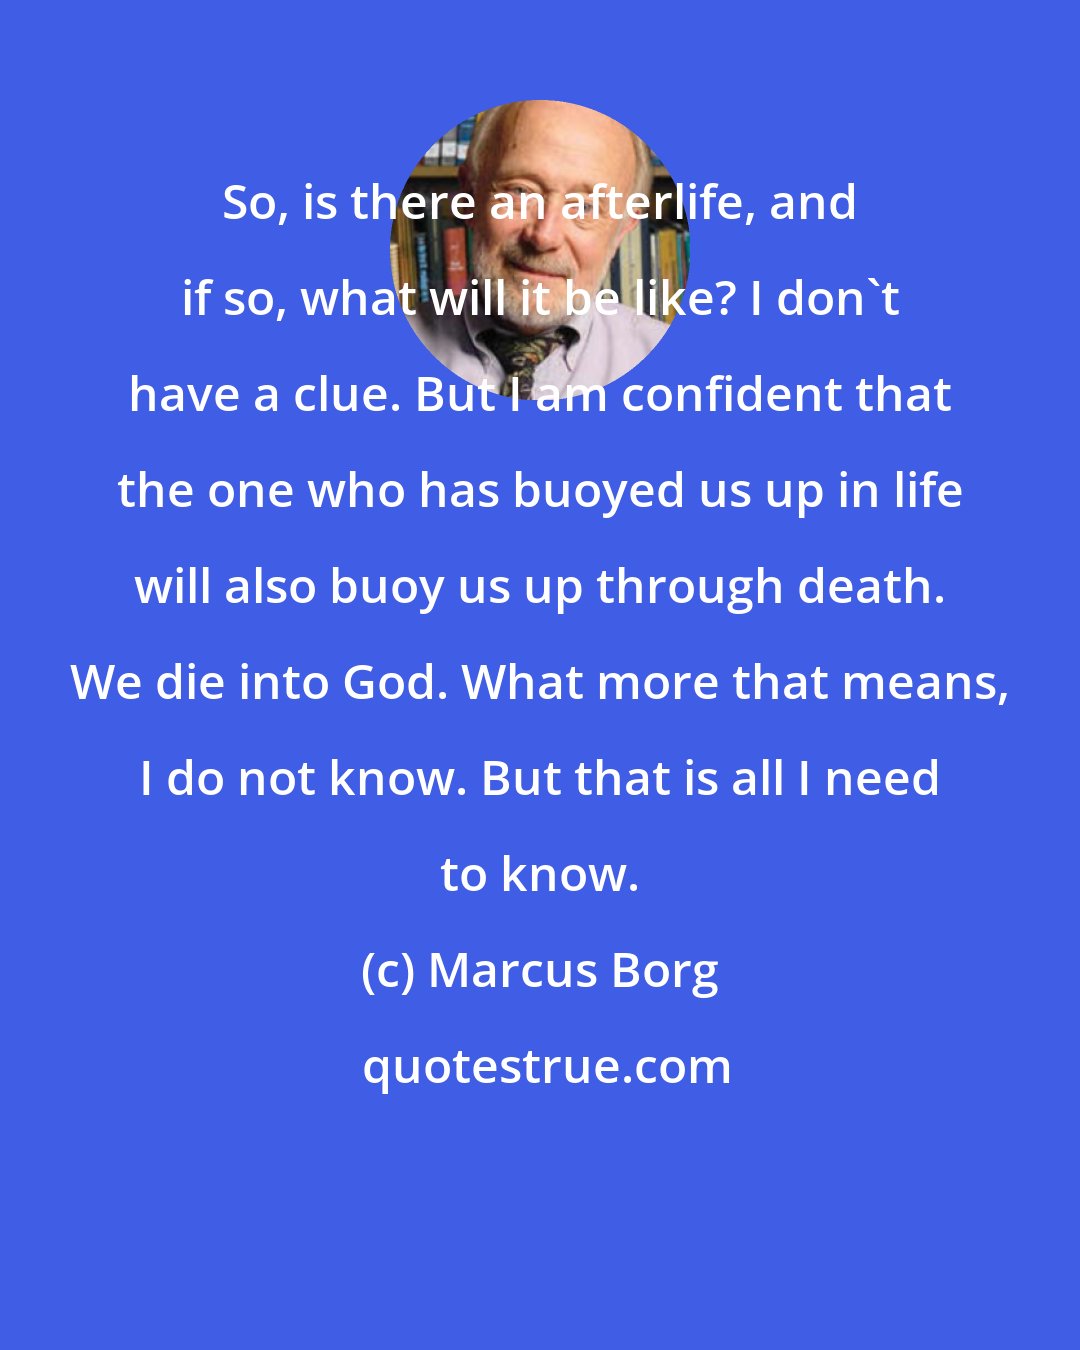 Marcus Borg: So, is there an afterlife, and if so, what will it be like? I don't have a clue. But I am confident that the one who has buoyed us up in life will also buoy us up through death. We die into God. What more that means, I do not know. But that is all I need to know.